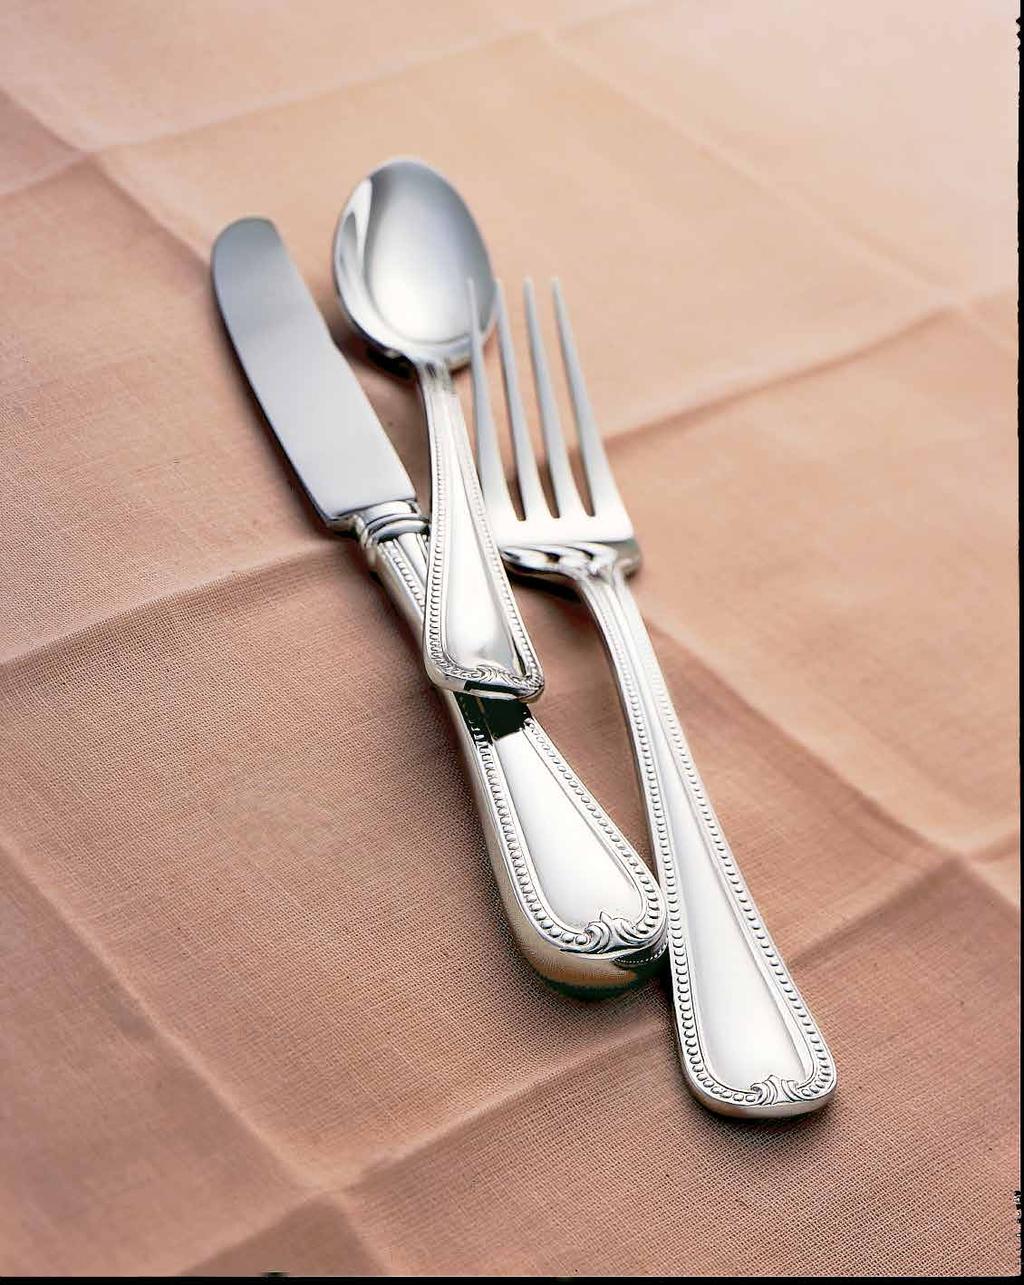 TronadaTM Featuring detailed etching forming rings on the handles, Tronada Flatware is the perfect design for any contemporary look.